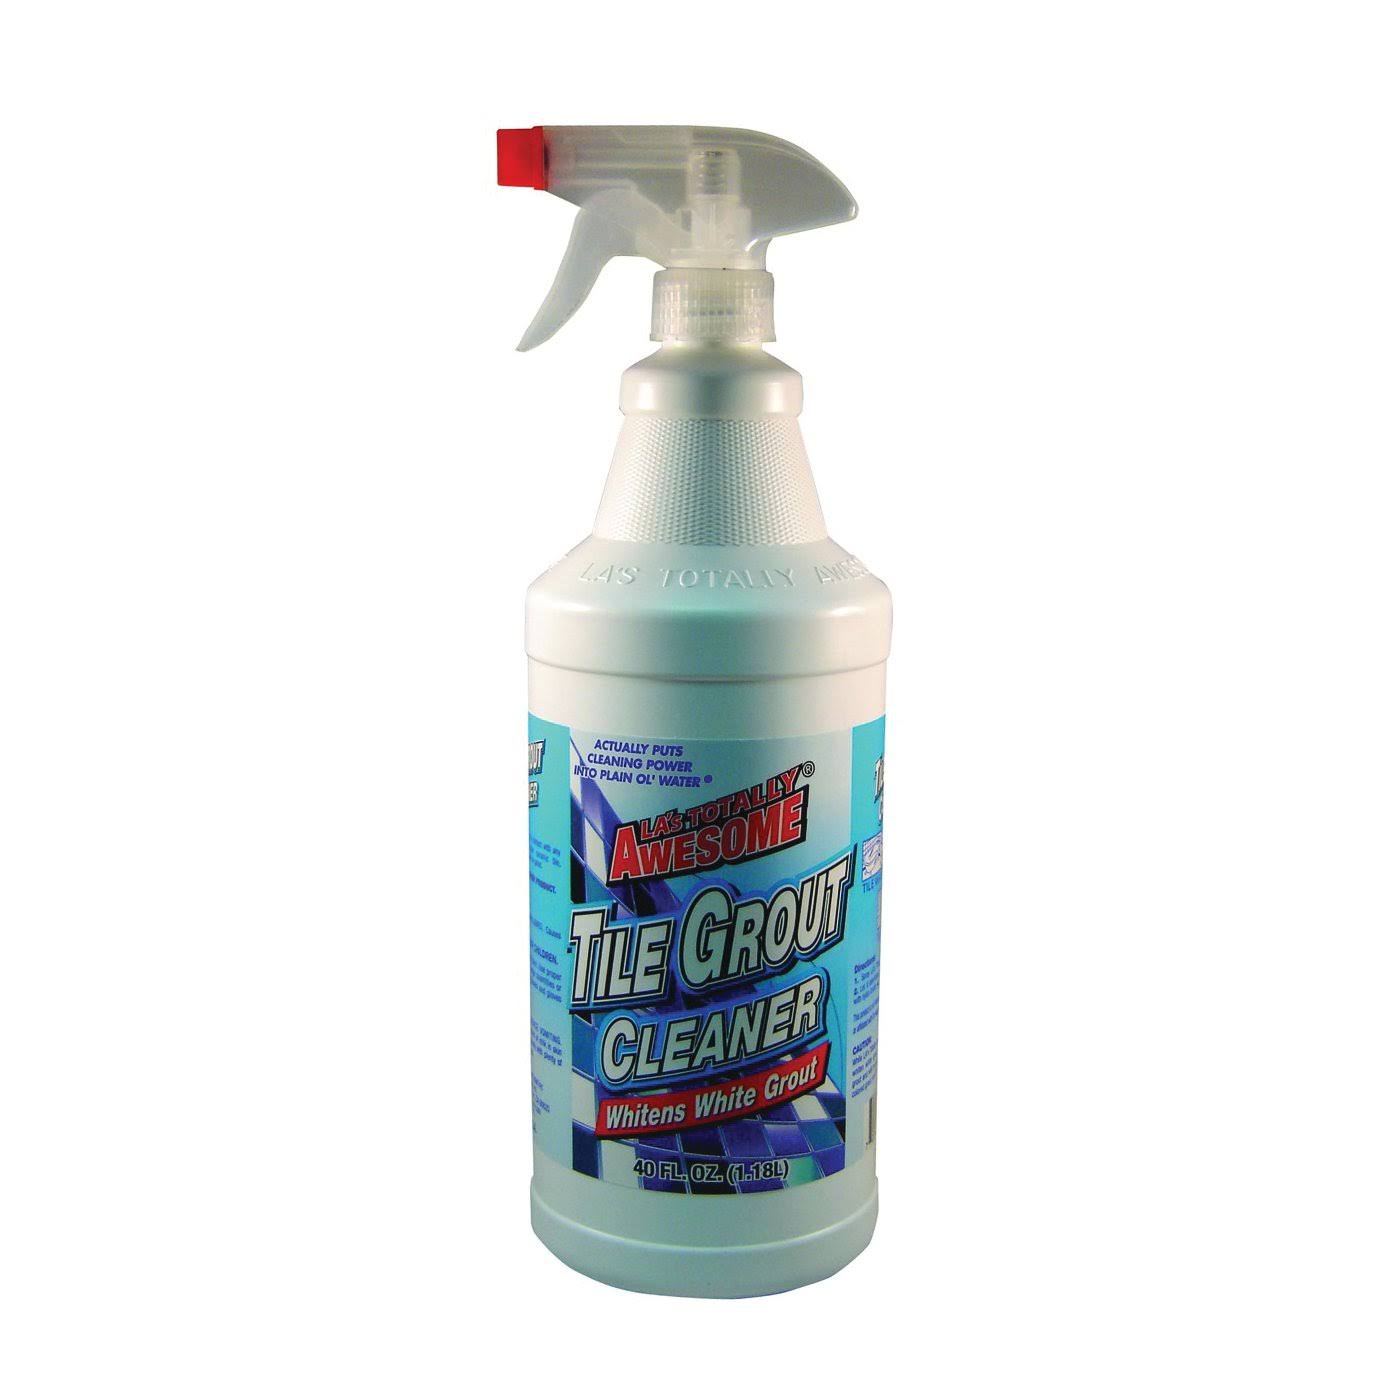 La''s Totally Awesome Tile Grout Cleaner - 40oz